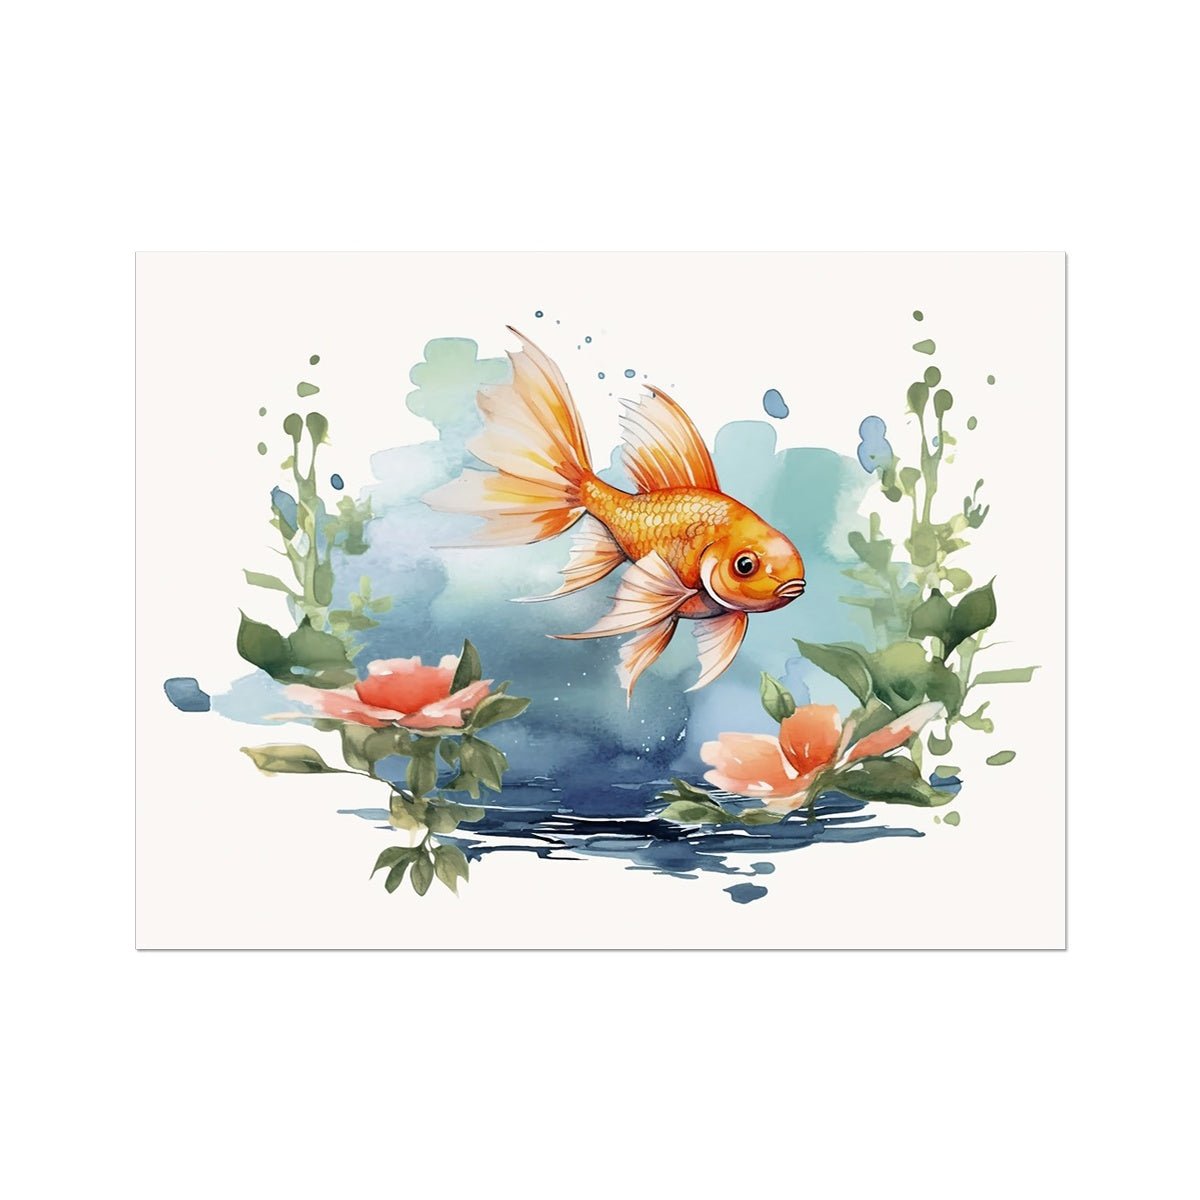 Nature's Serenity - Goldfish Blossoms 4 6 - Animal Poster Print by doingly